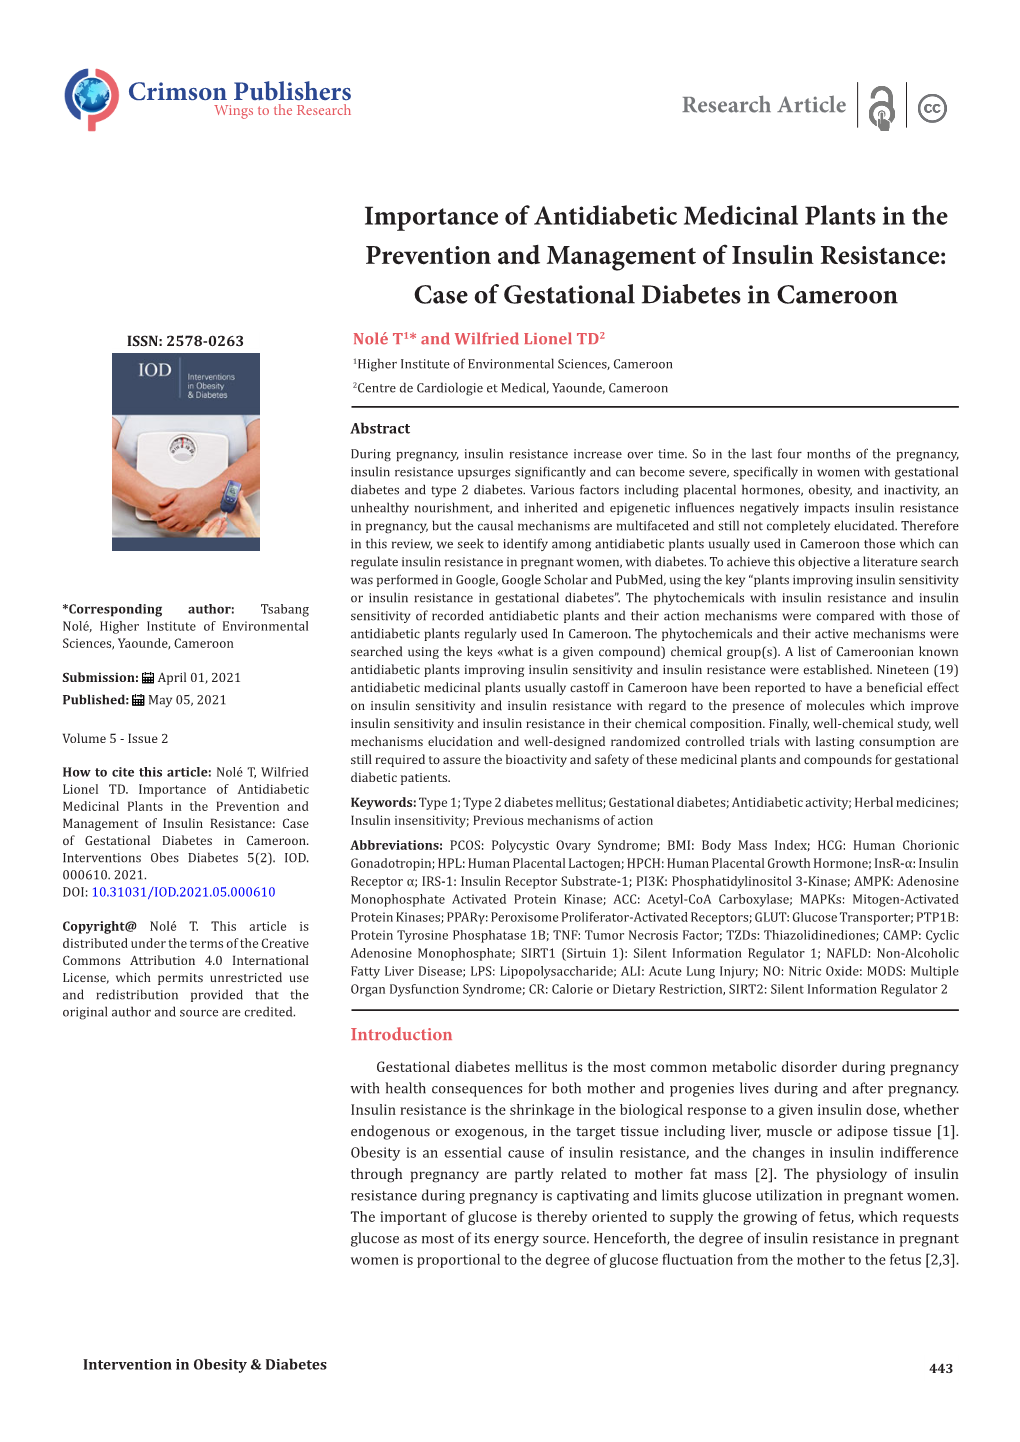 Importance of Antidiabetic Medicinal Plants in the Prevention and Management of Insulin Resistance: Case of Gestational Diabetes in Cameroon